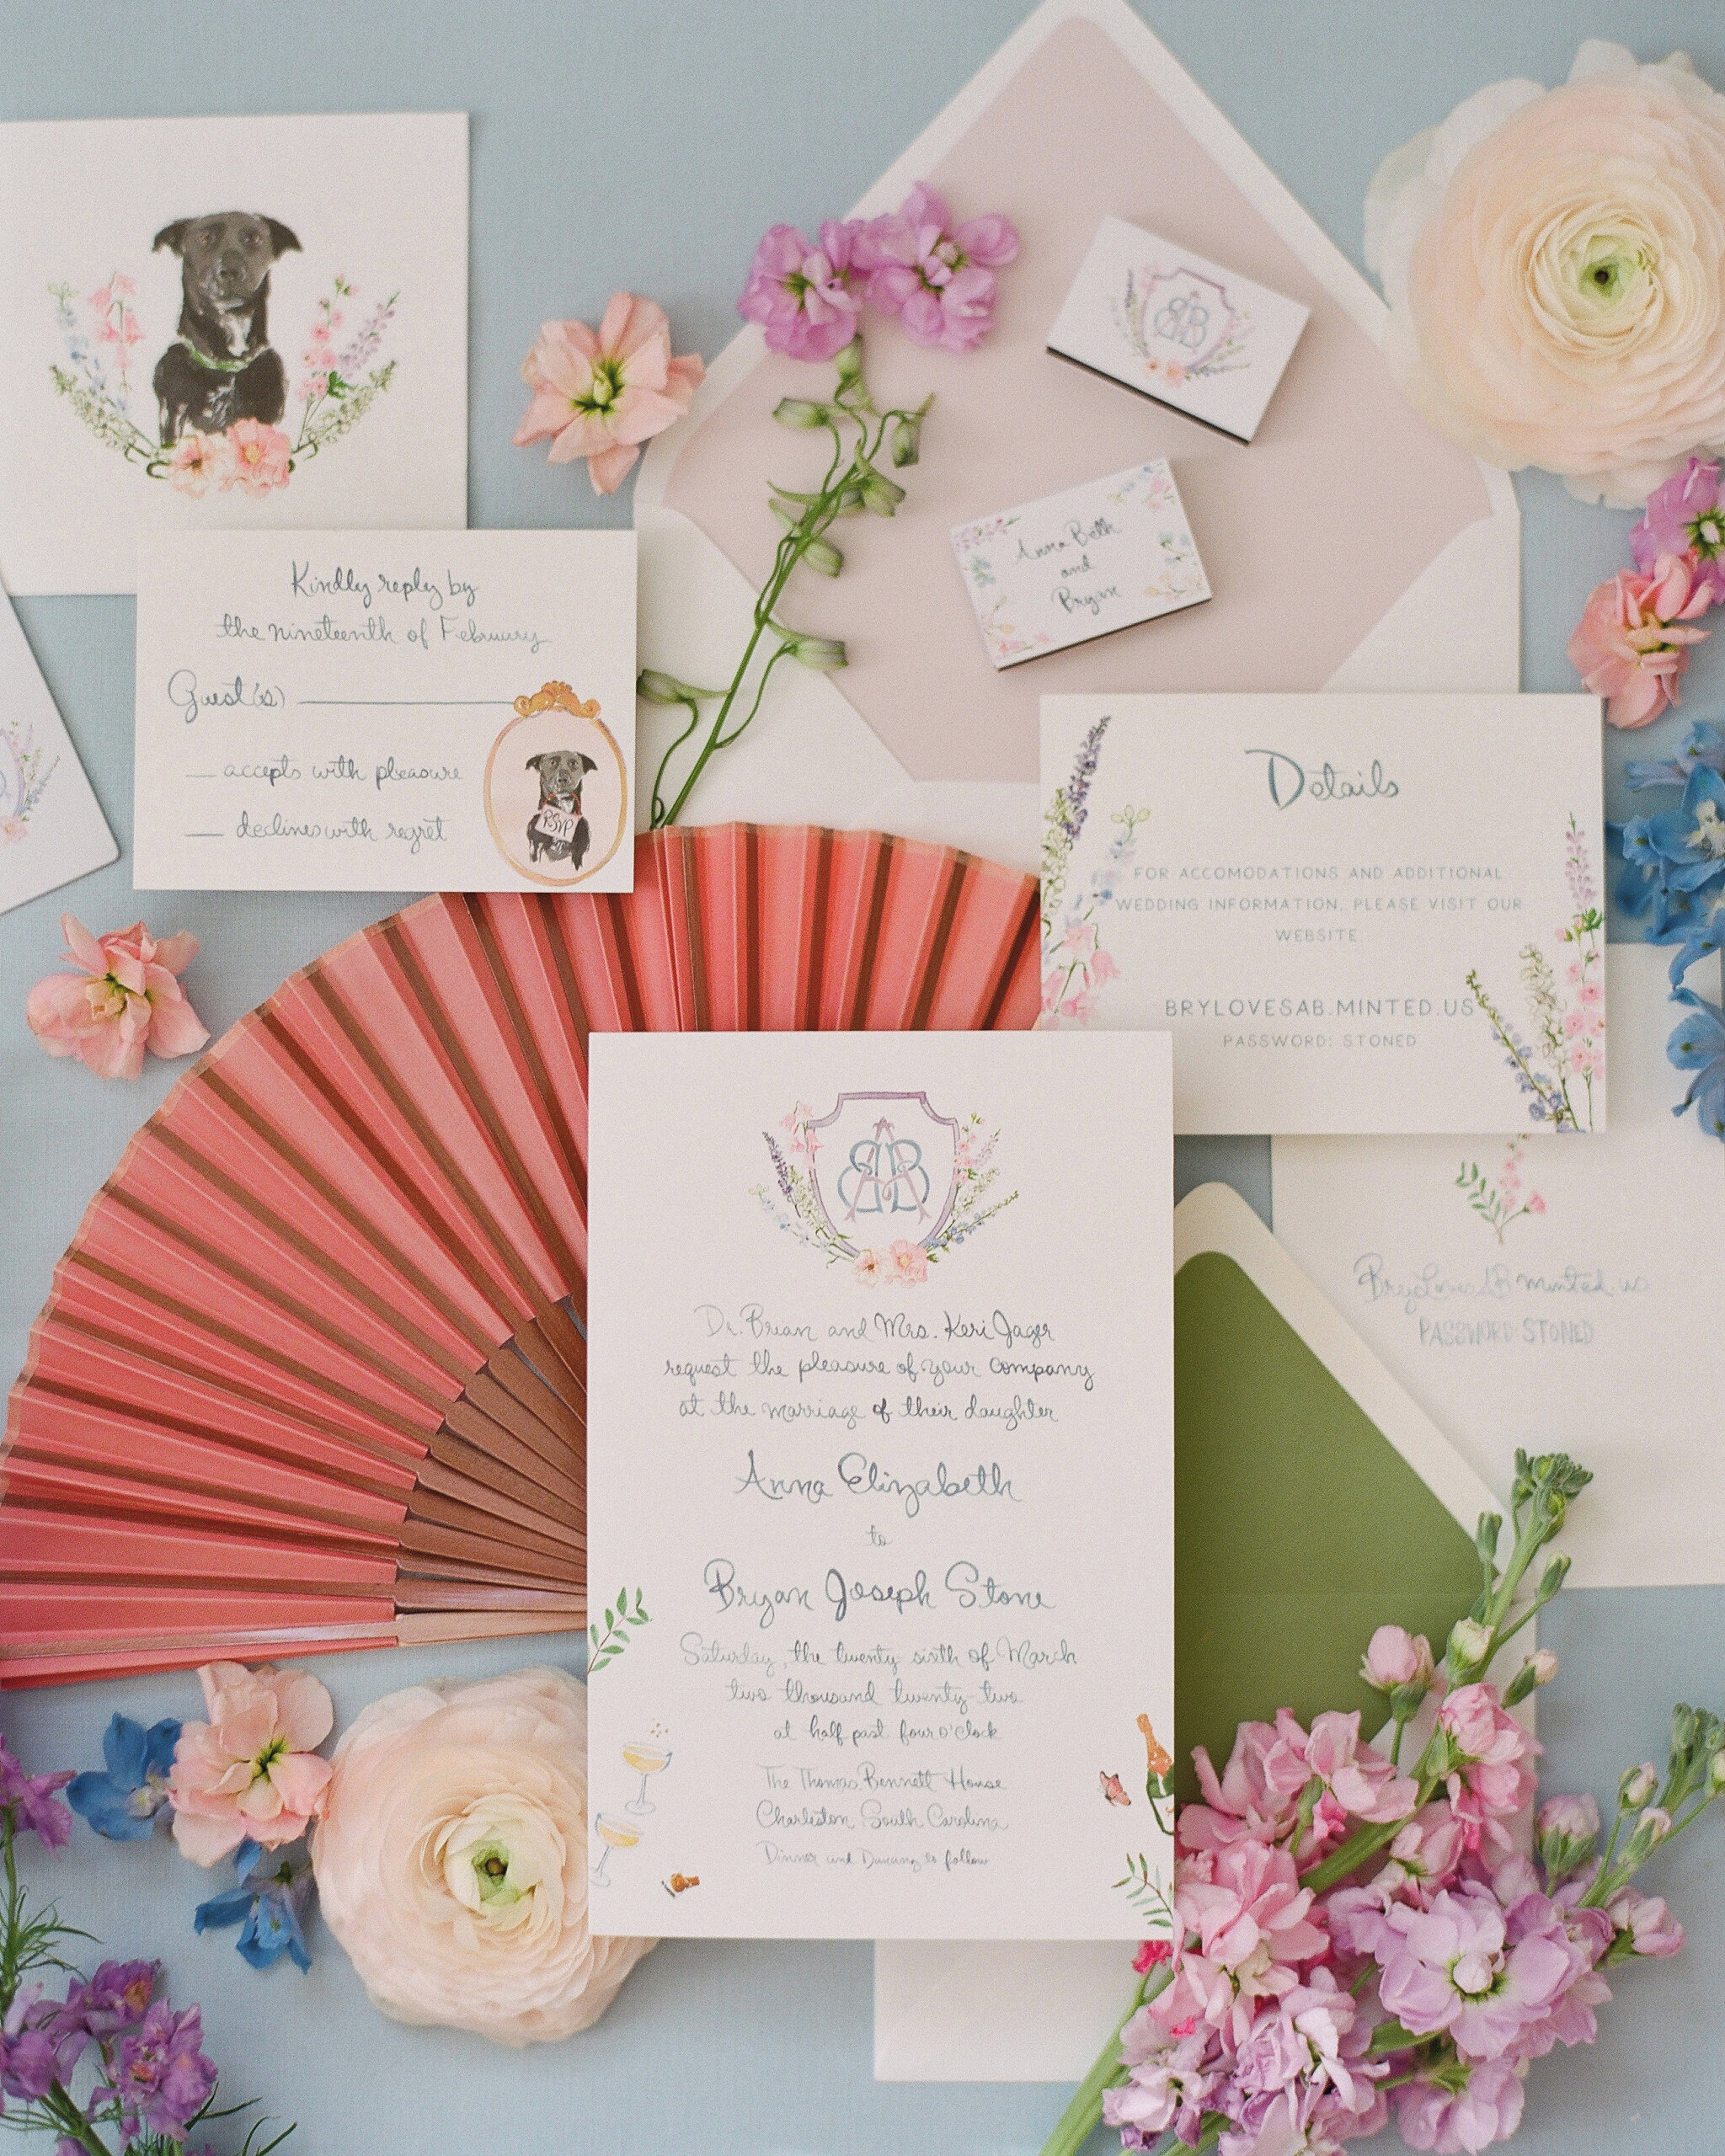 Every detail of this paper suite by @juliekingstudio was perfection   @annerhettphotography